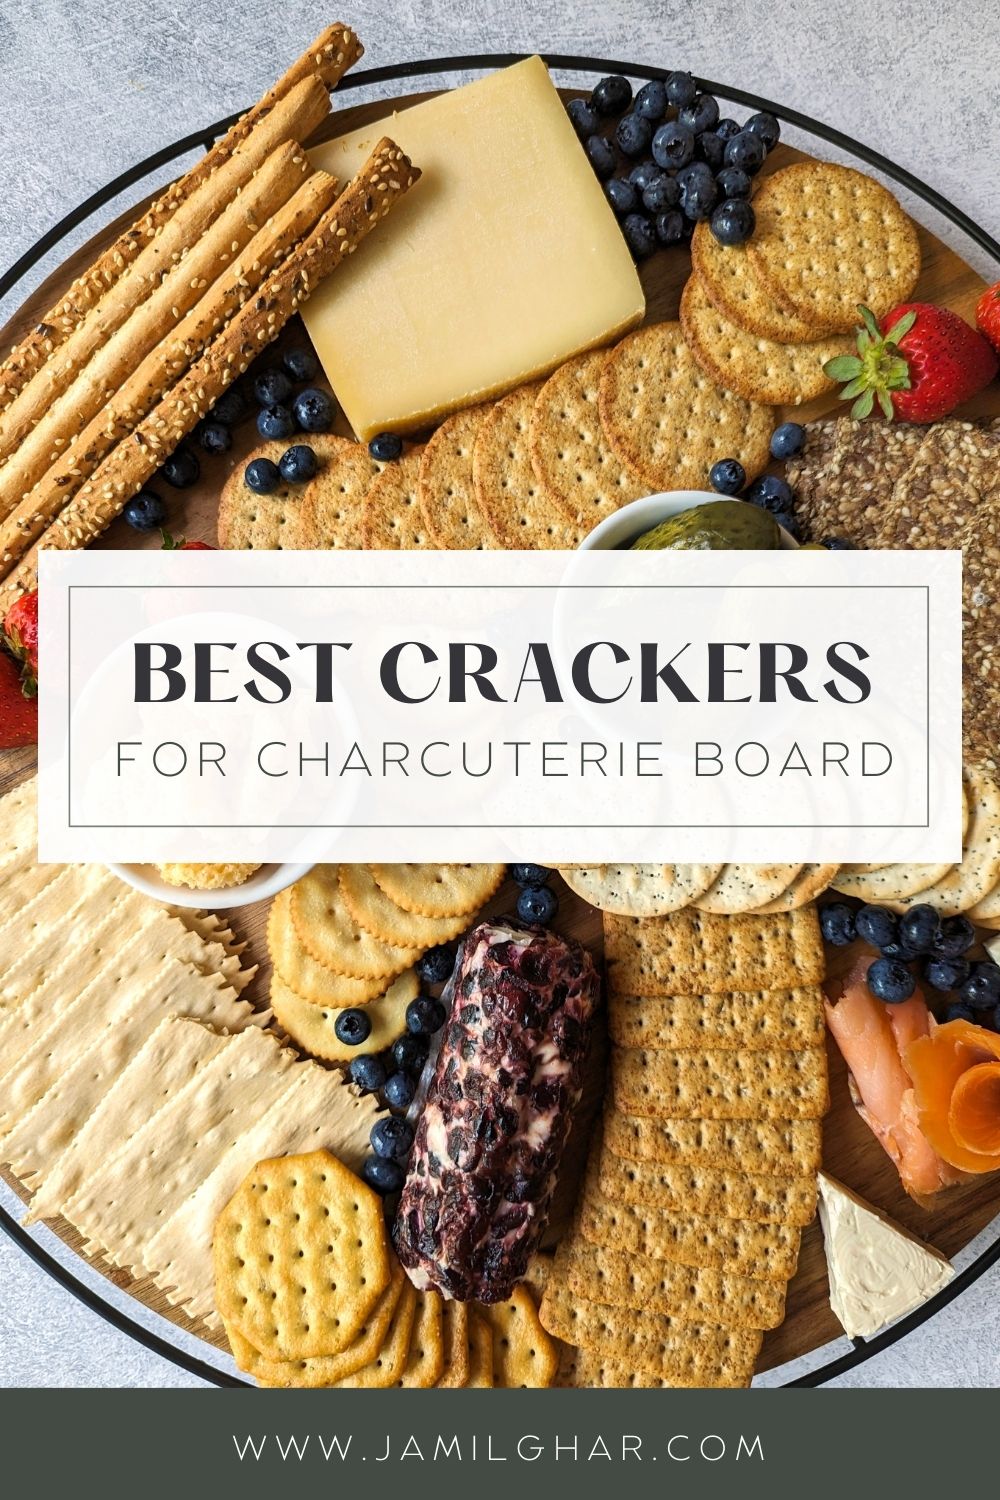 A pinterest pin for Best Crackers for Charcuterie Board.